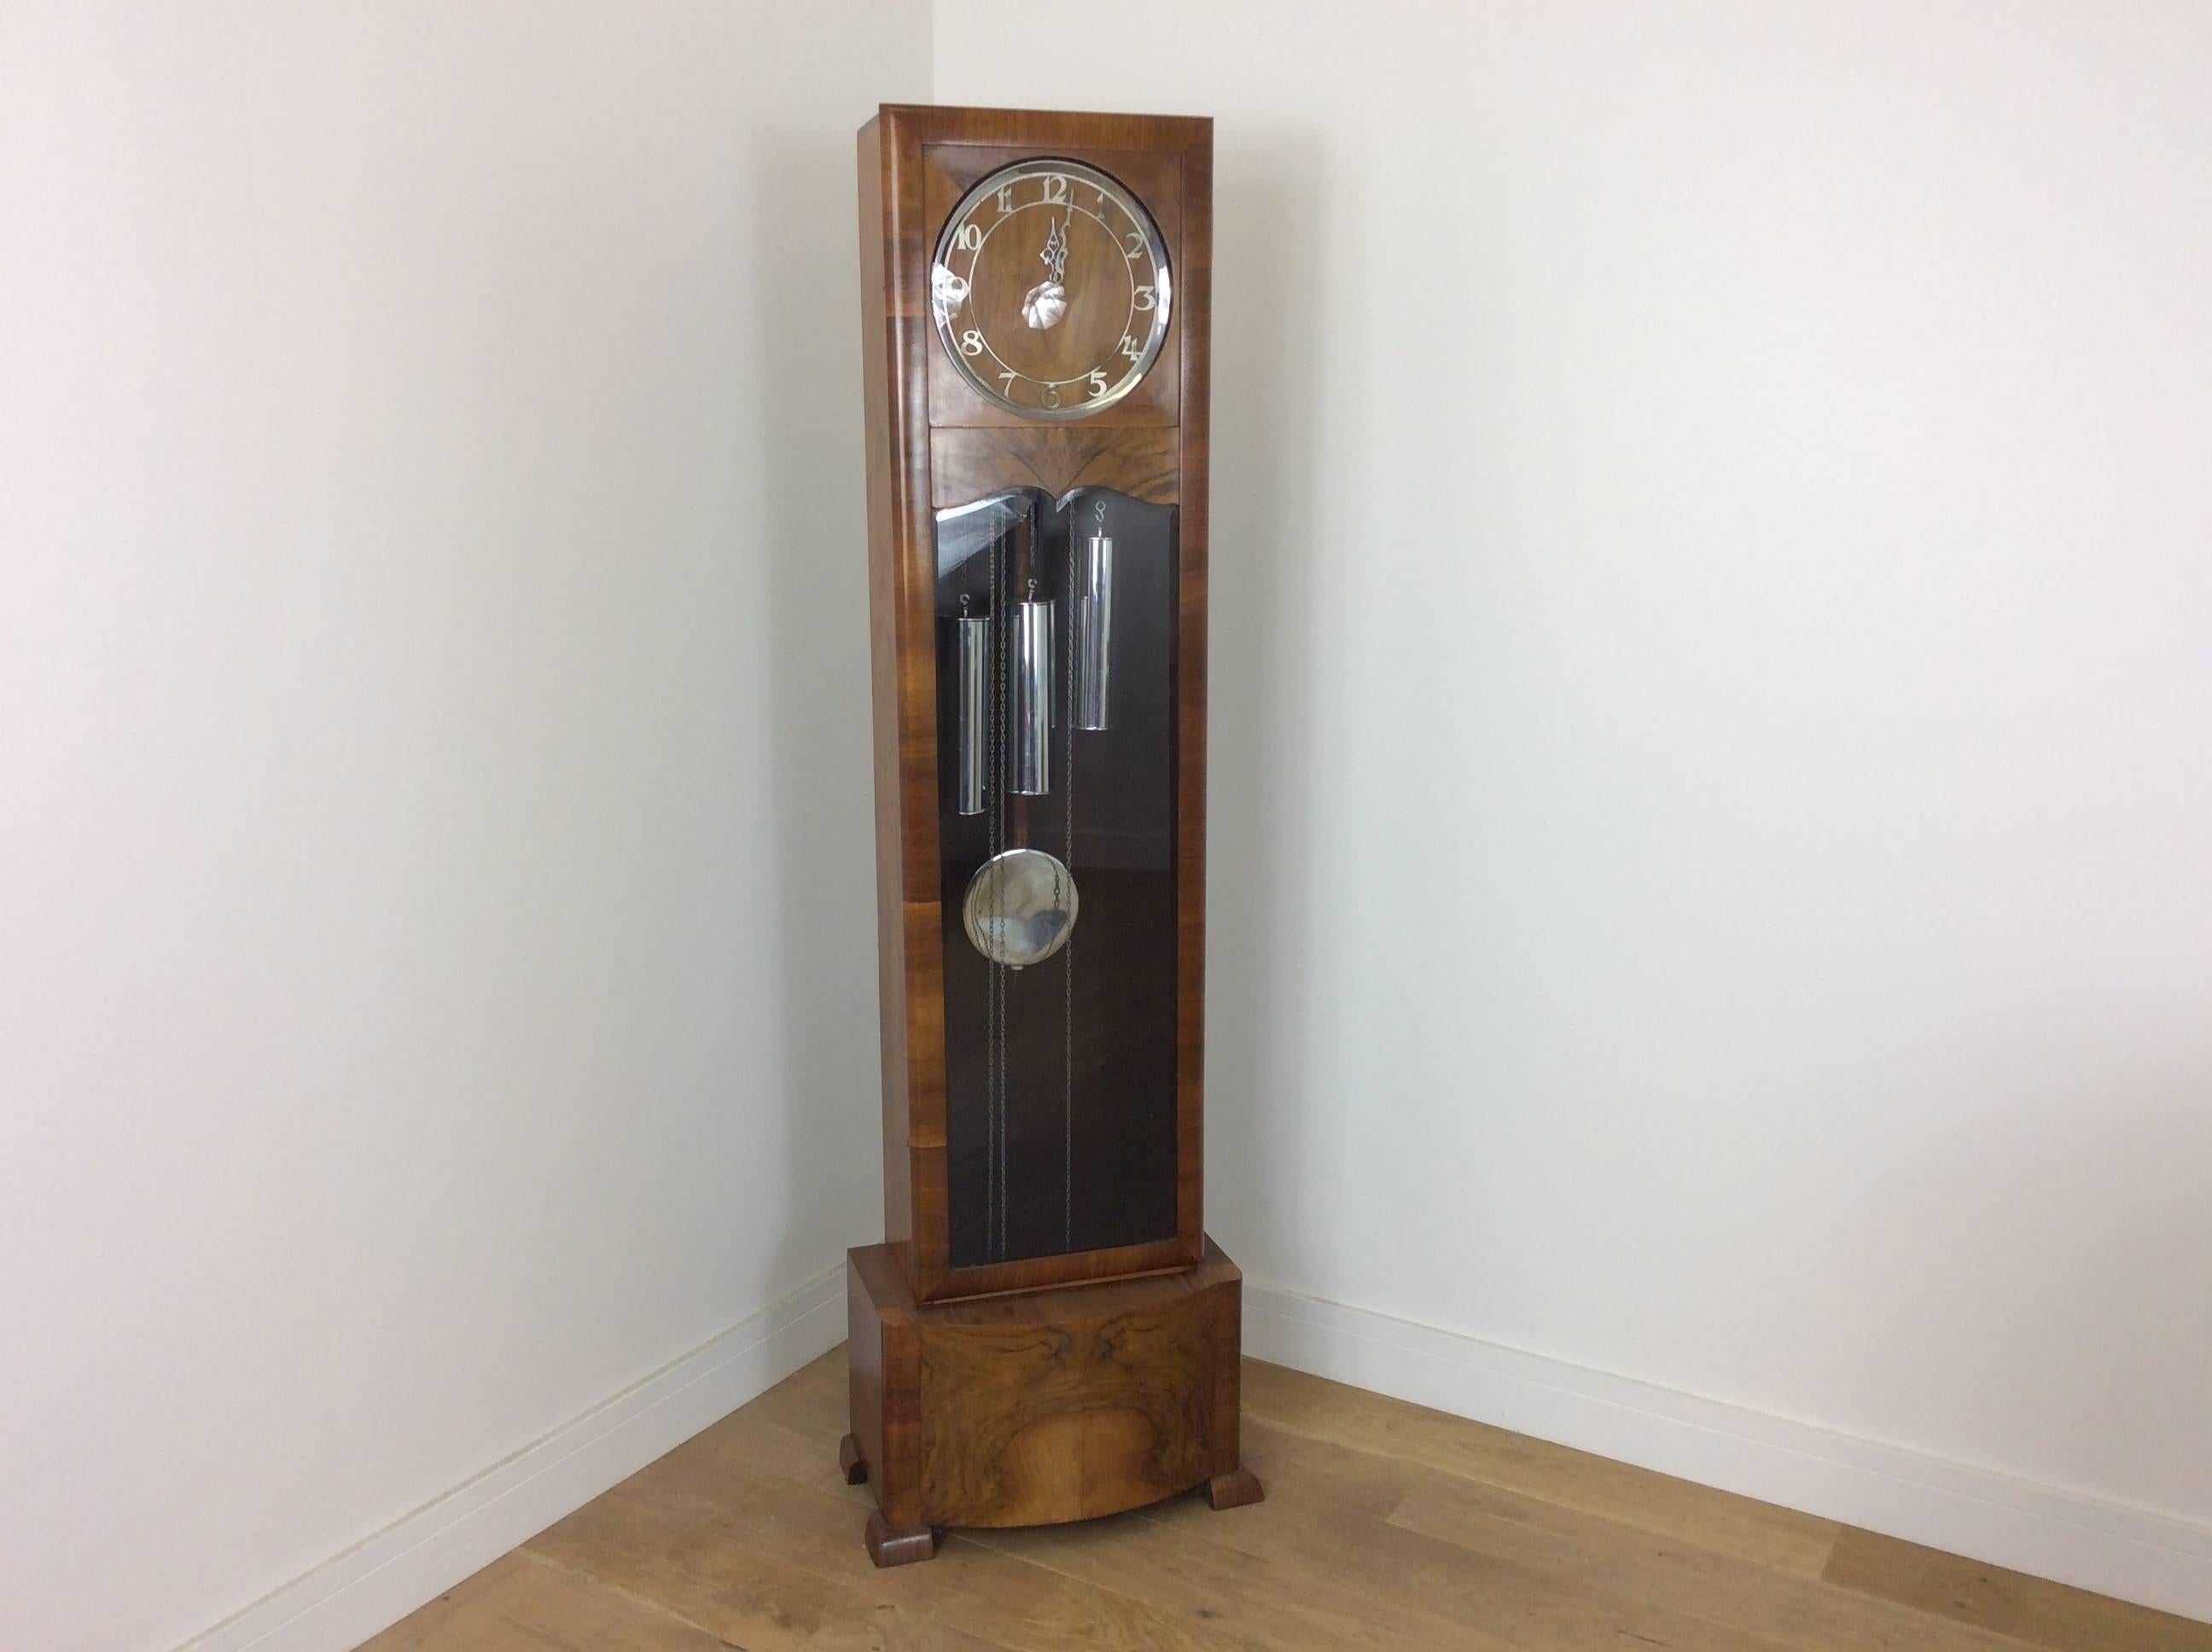 Art Deco grandfather clock, beautiful walnut cased clock with domed clock face.
Westminster chime.
Measures: 180 cm H, 50 cm W, 31 cm D
British, circa 1930.